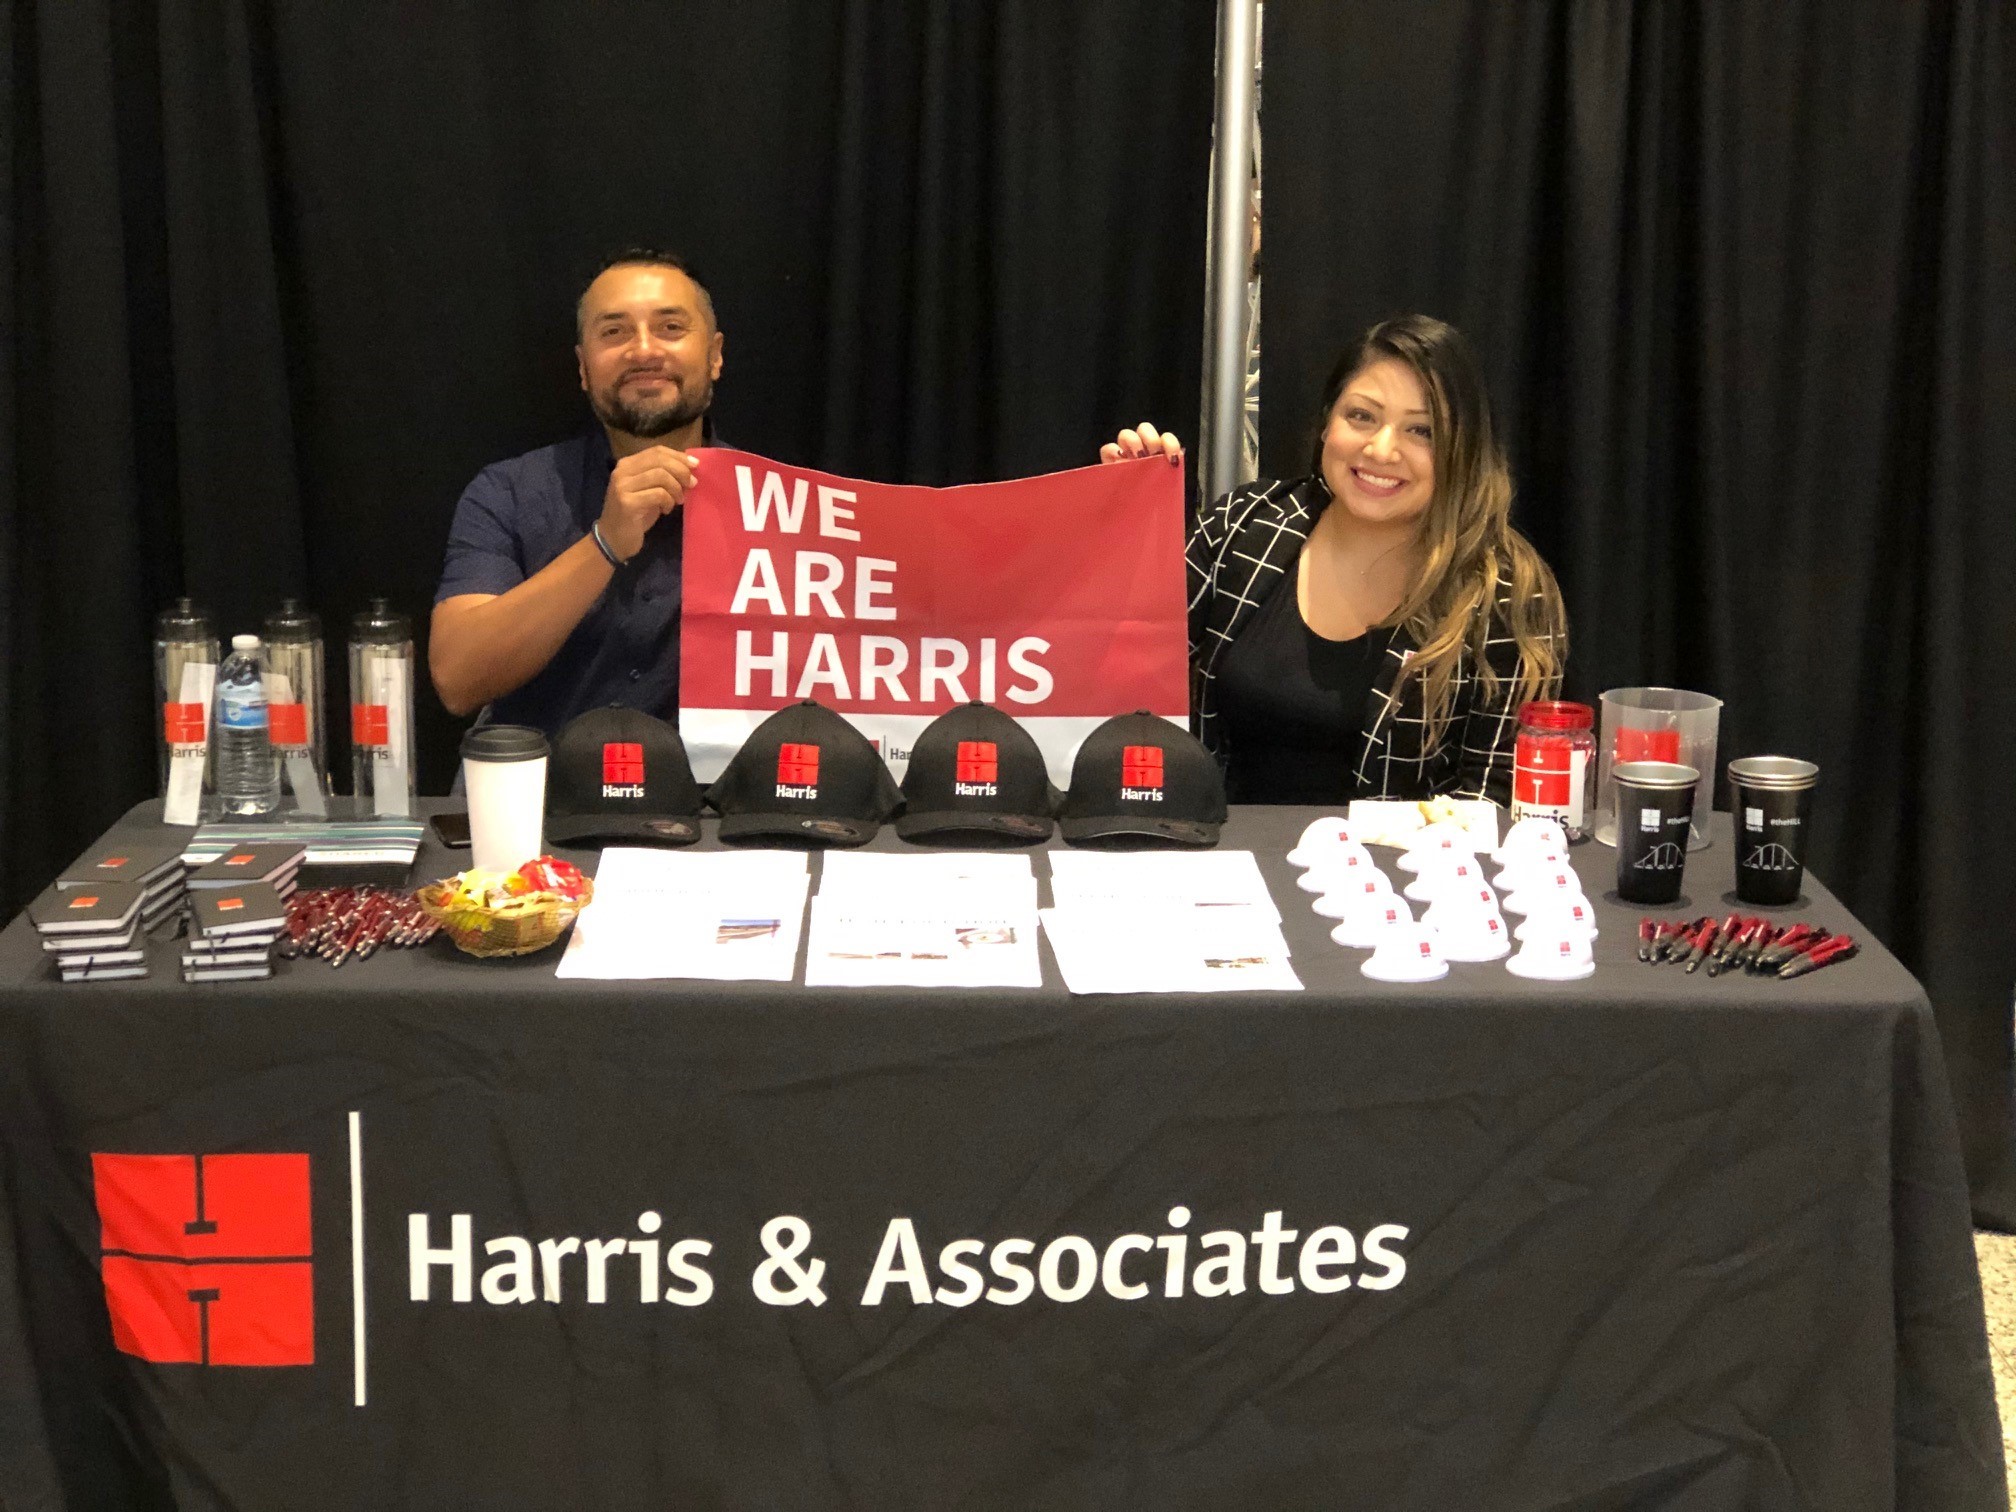 Harris professionals participating in job fairs for the next generation.